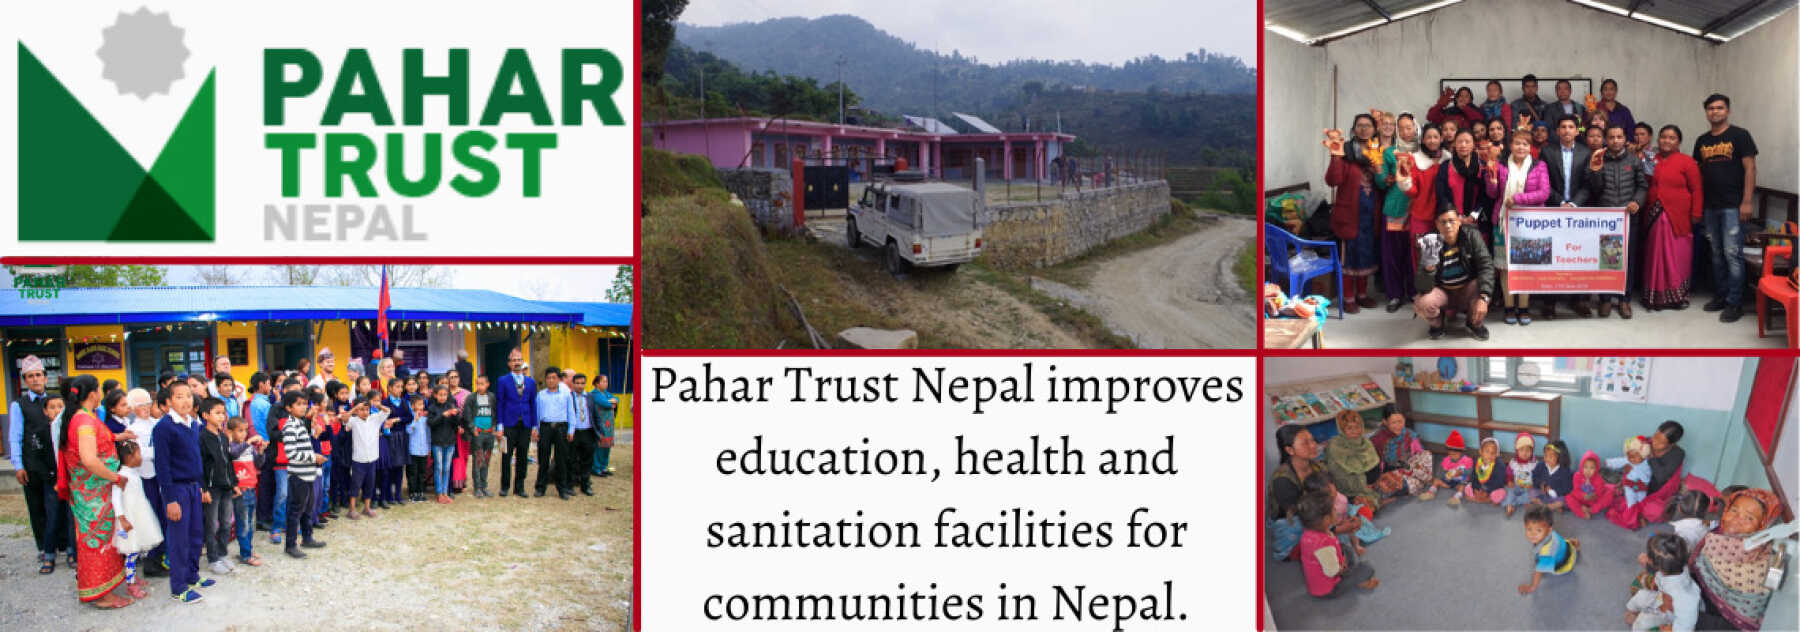 Featured Image for Pahar Trust Nepal